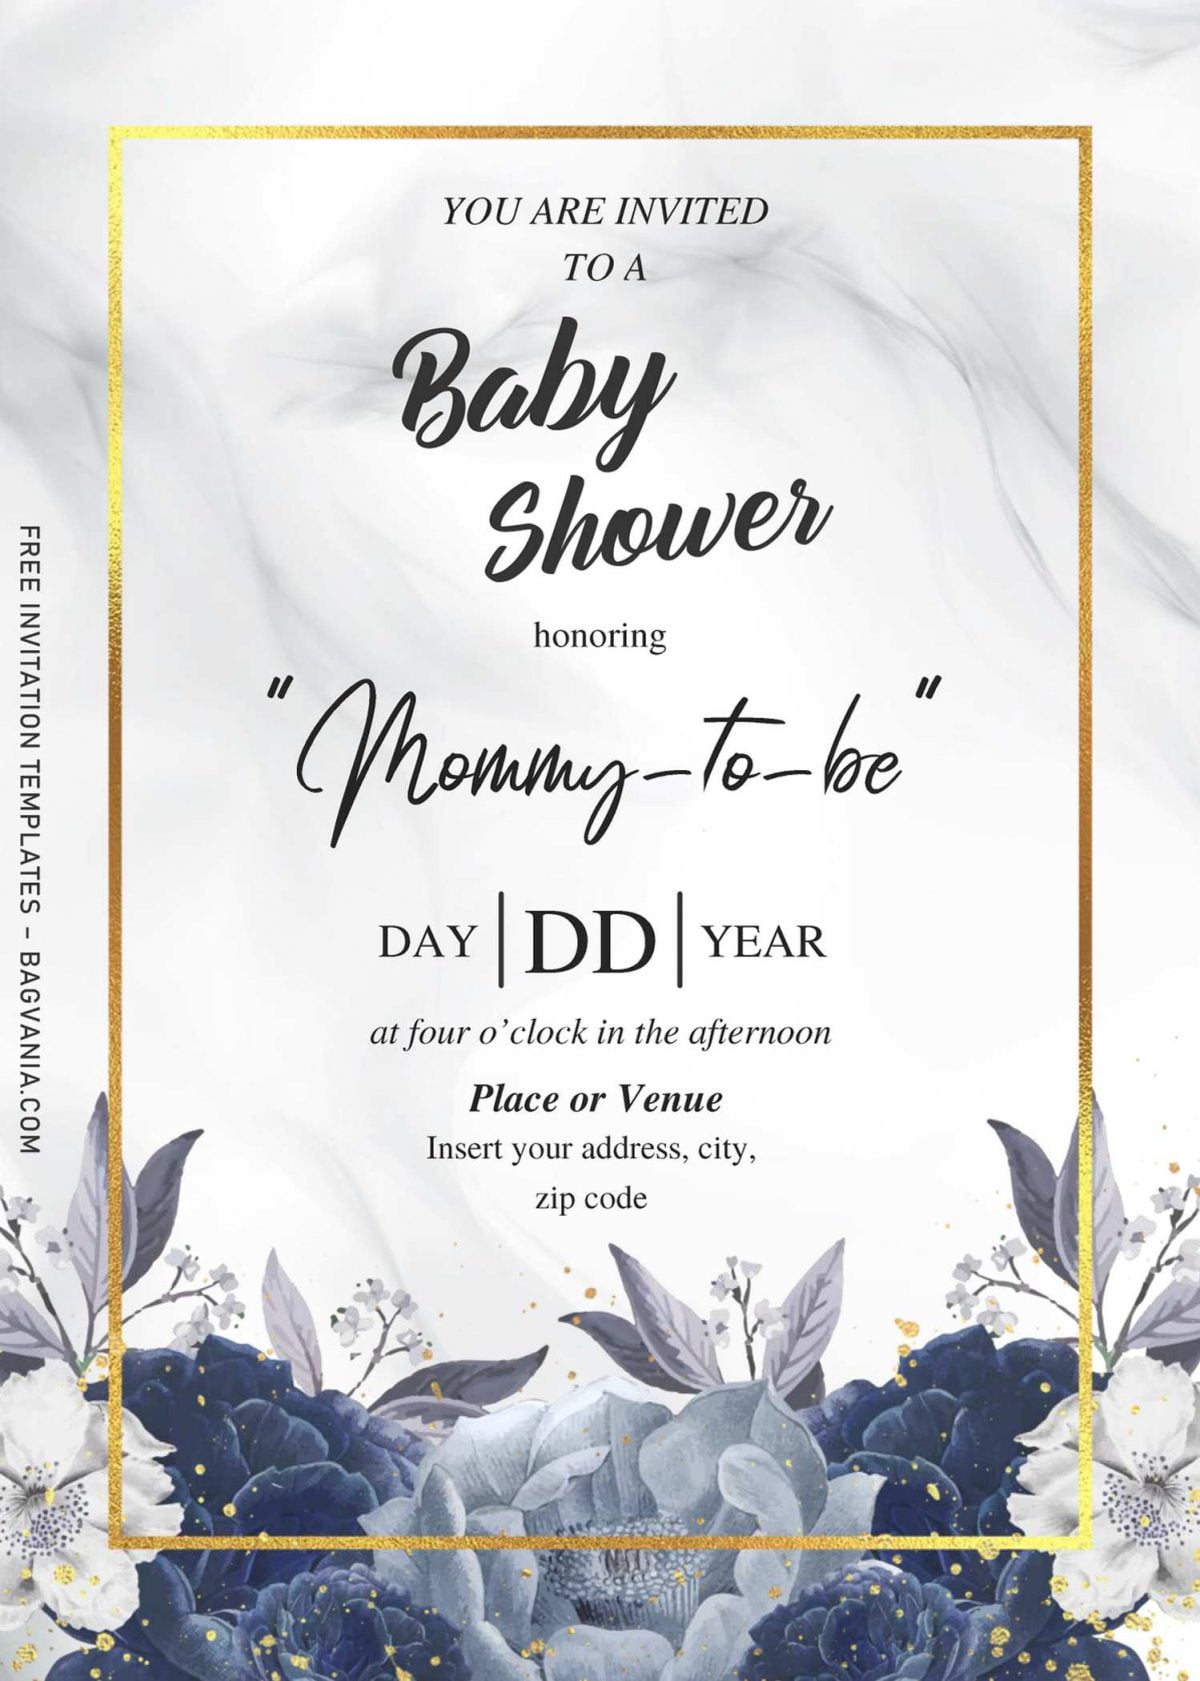 Dusty Blue Rose Baby Shower Invitation Templates - Editable With MS Word and has white and black marble background